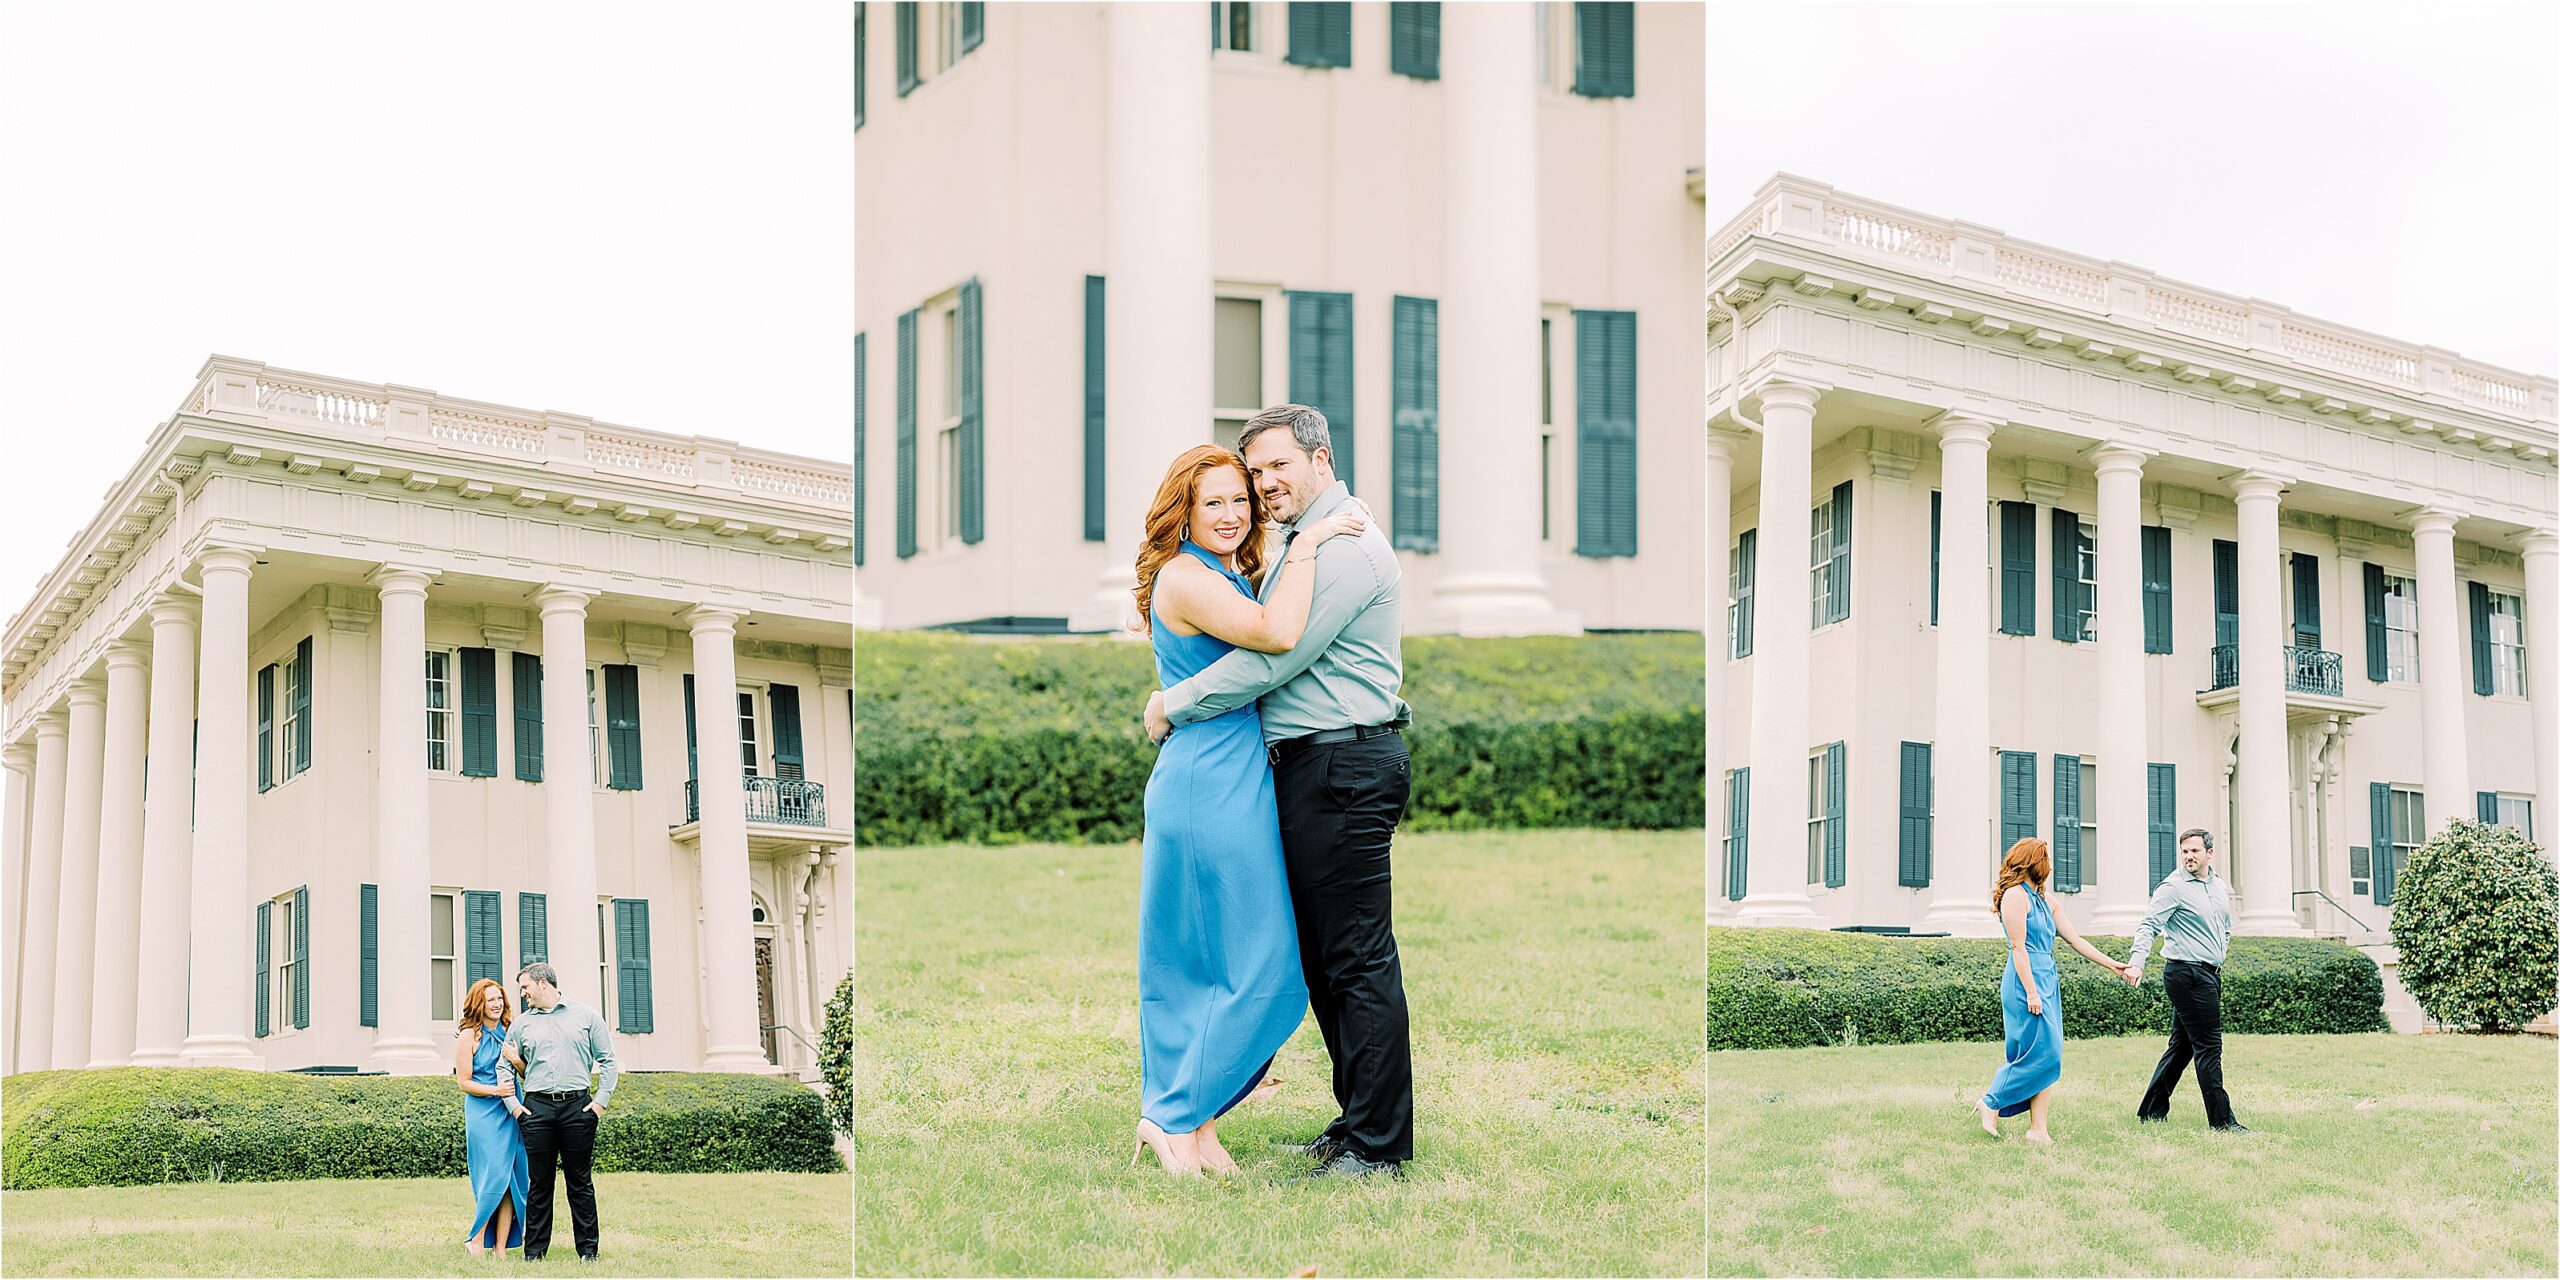 Couple embracing in front of old home 